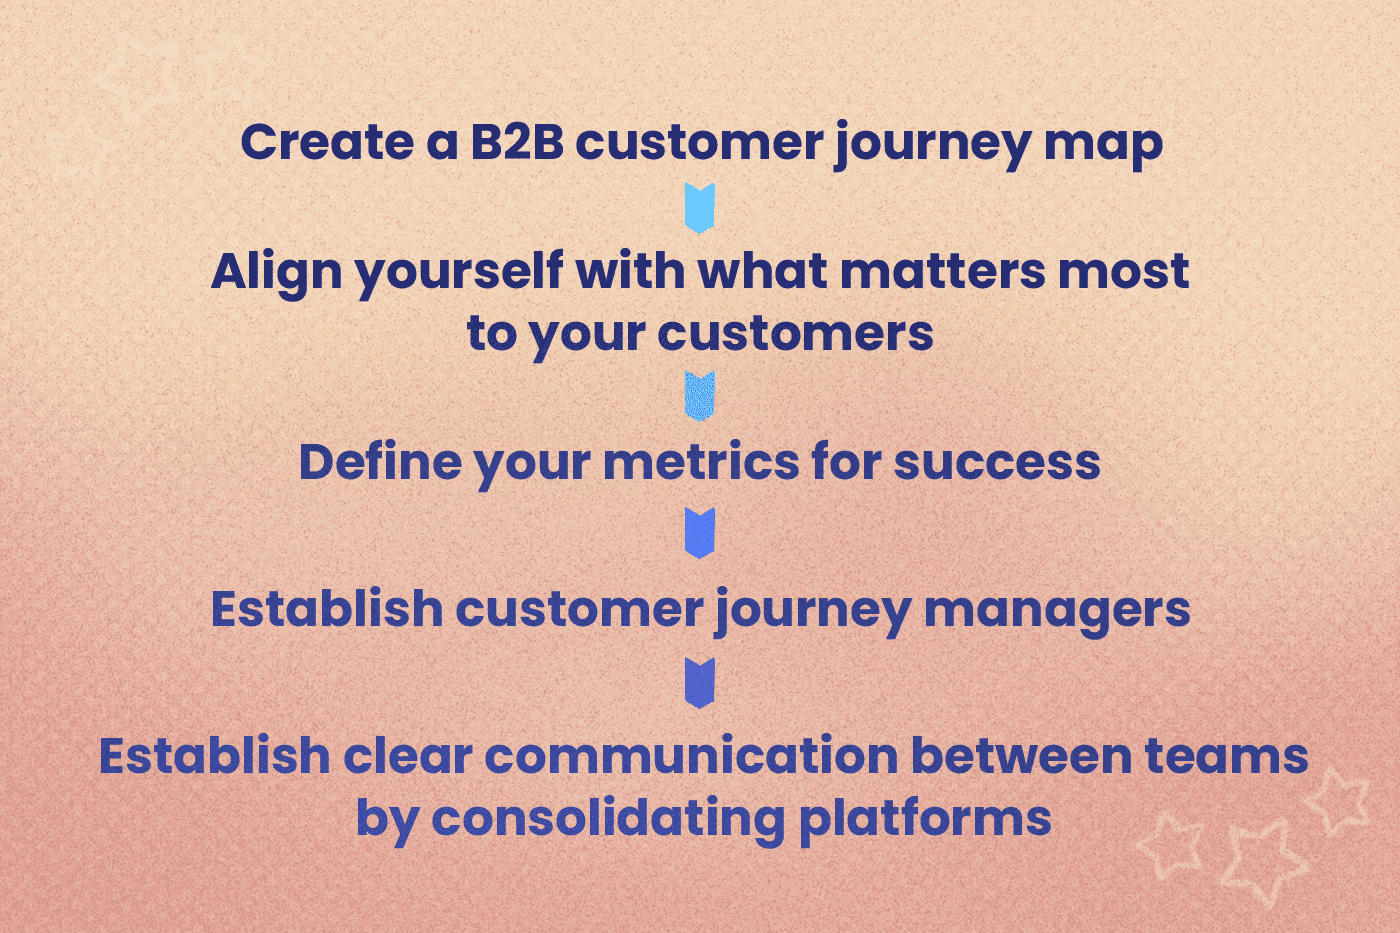 5 ways to create a better B2B customer journey: Create a B2B customer journey map. Align yourself with what matters most to your customers. Define your metrics for success. Establish customer journey managers. Establish clear communication between teams by consolidating platforms.